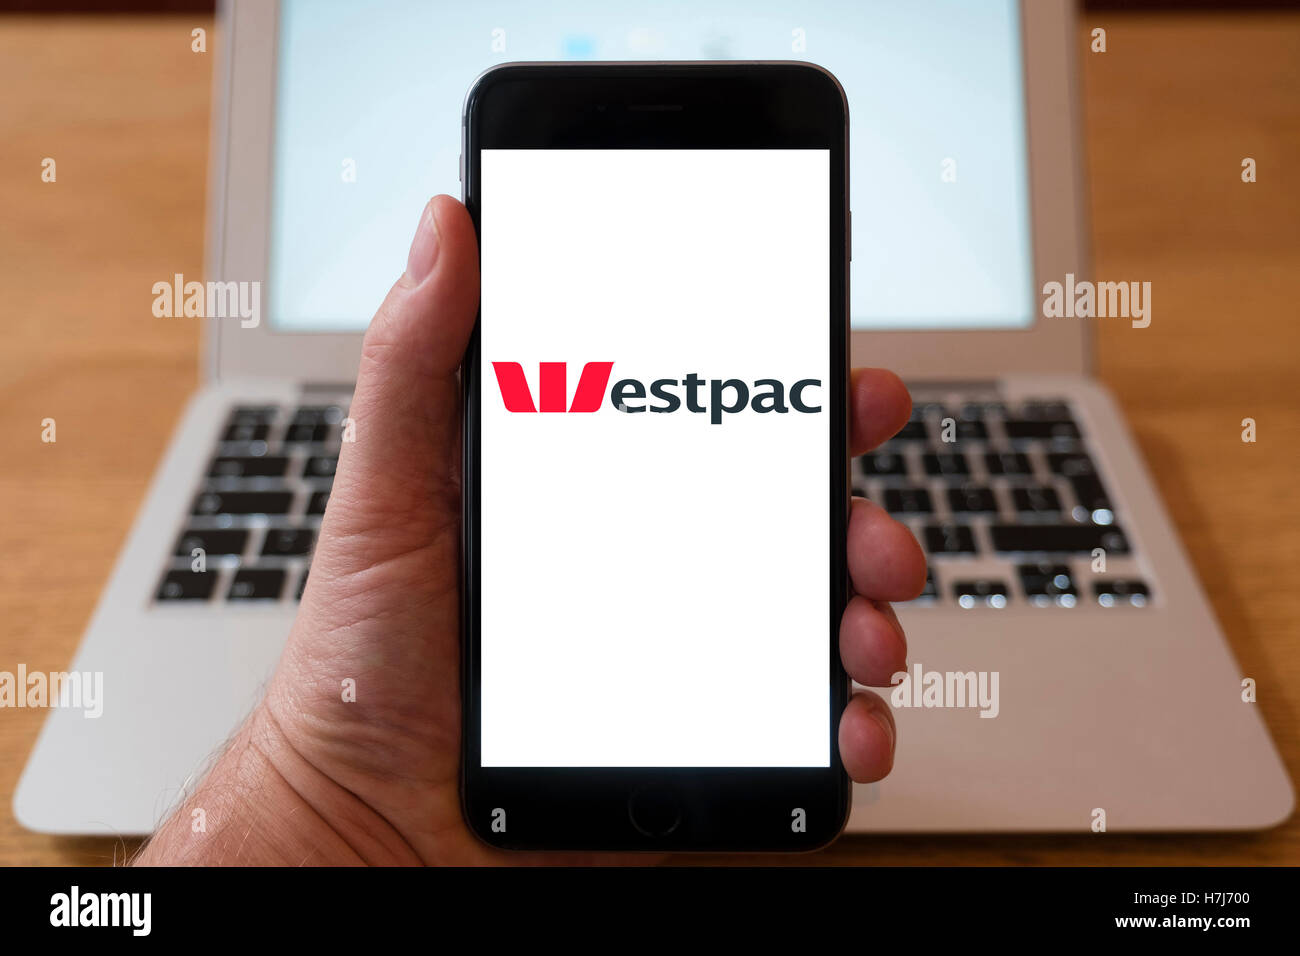 Using iPhone smartphone to display logo of Westpac, Australian bank and financial-services provider Stock Photo